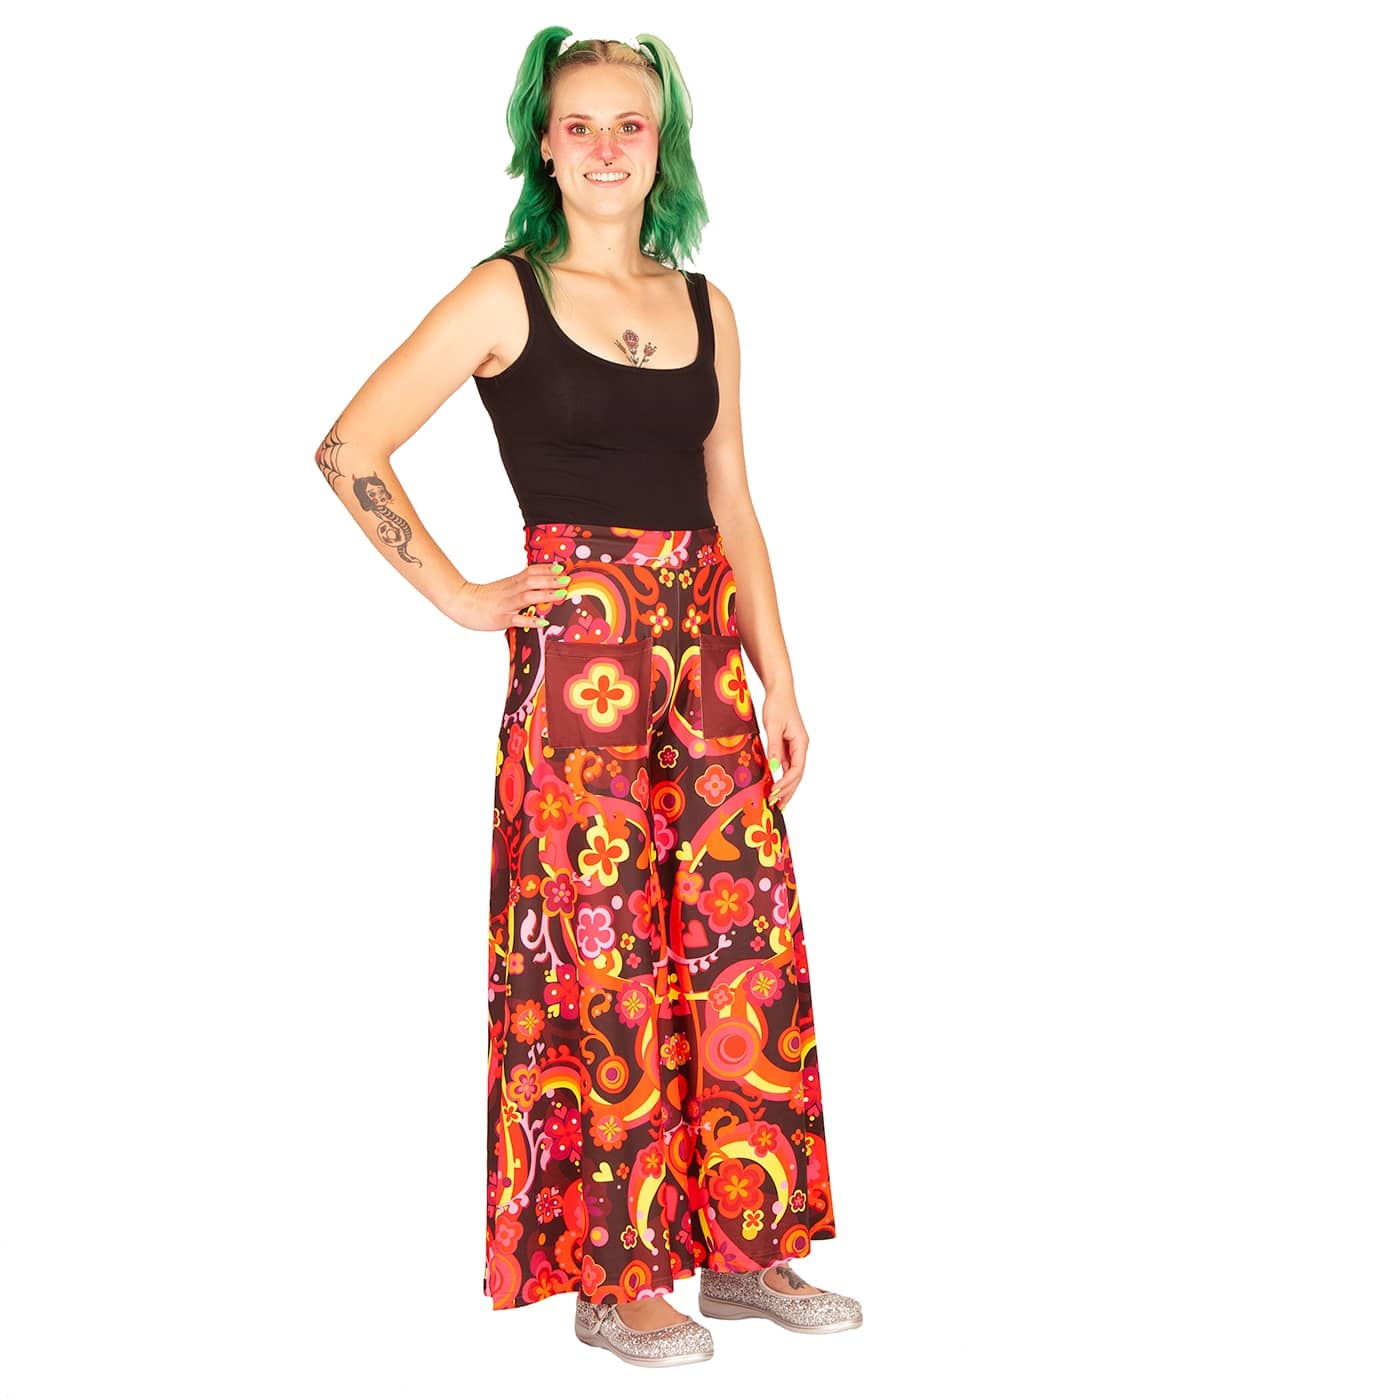 Groovy Days Wide Leg Pants by RainbowsAndFairies.com (Woodstock - Flower Power - Psychedelic - Hippy - Pallazo Pants - Flares Bell Bottoms - Vintage Inspired - Pants With Pockets) - SKU: CL_WIDEL_GROOV_DAY - Pic 03